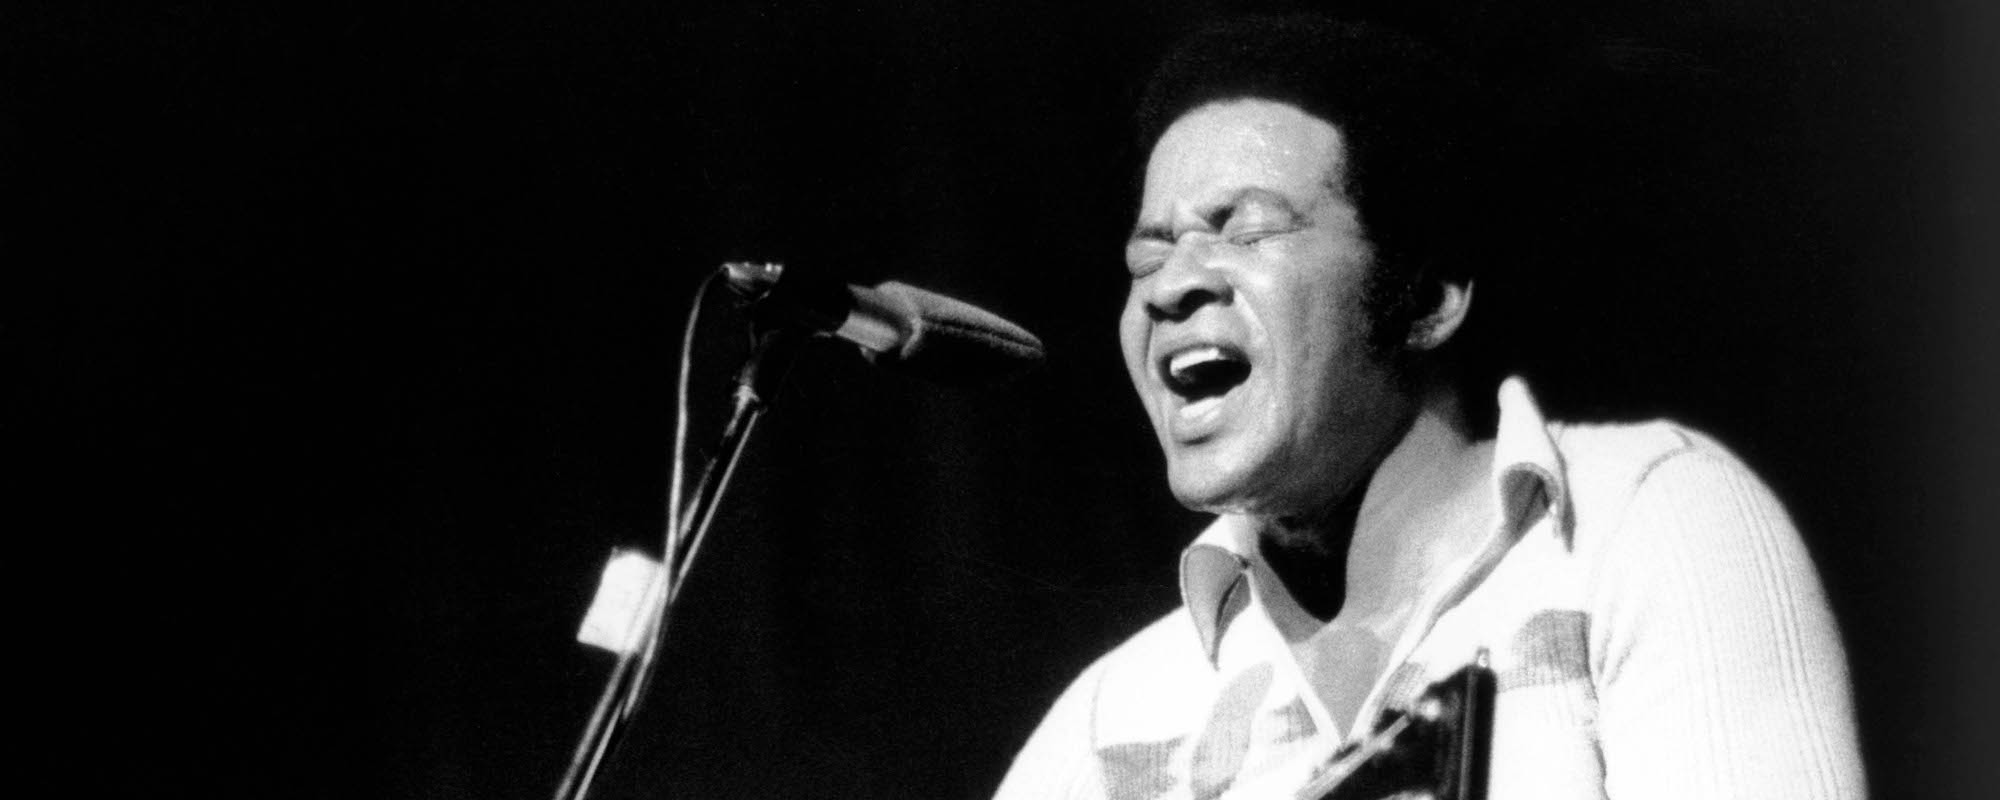 The Optimistic Meaning Behind “Lean On Me” by Bill Withers